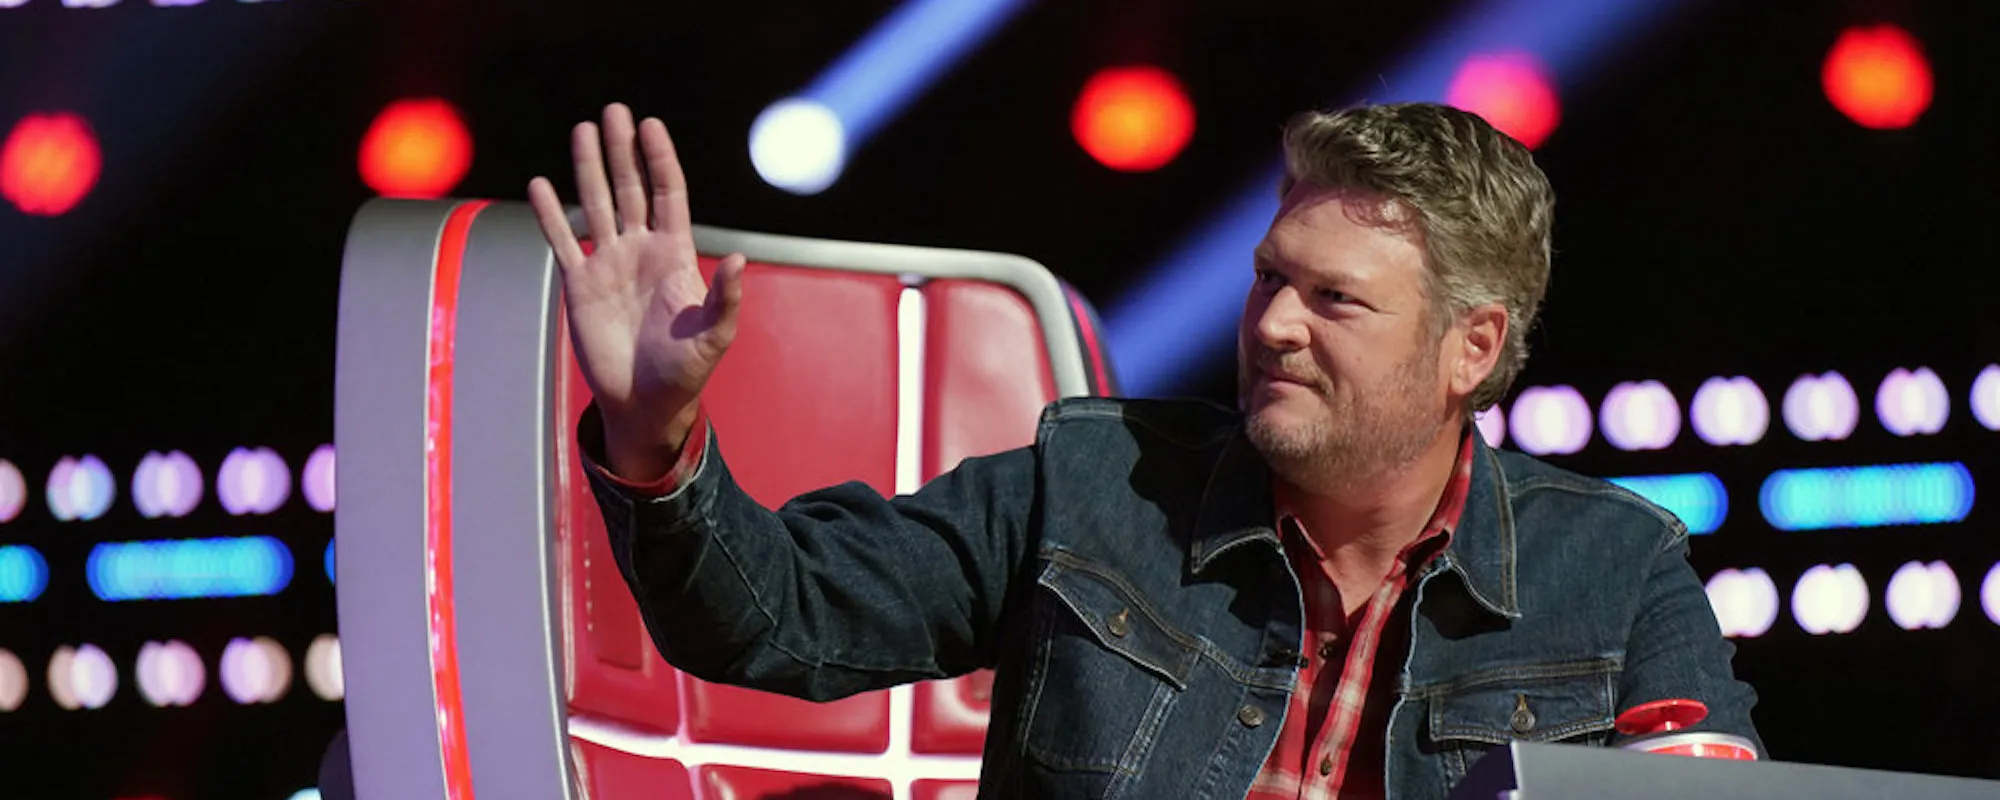 Blake Shelton to Leave ‘The Voice’ After Season 23